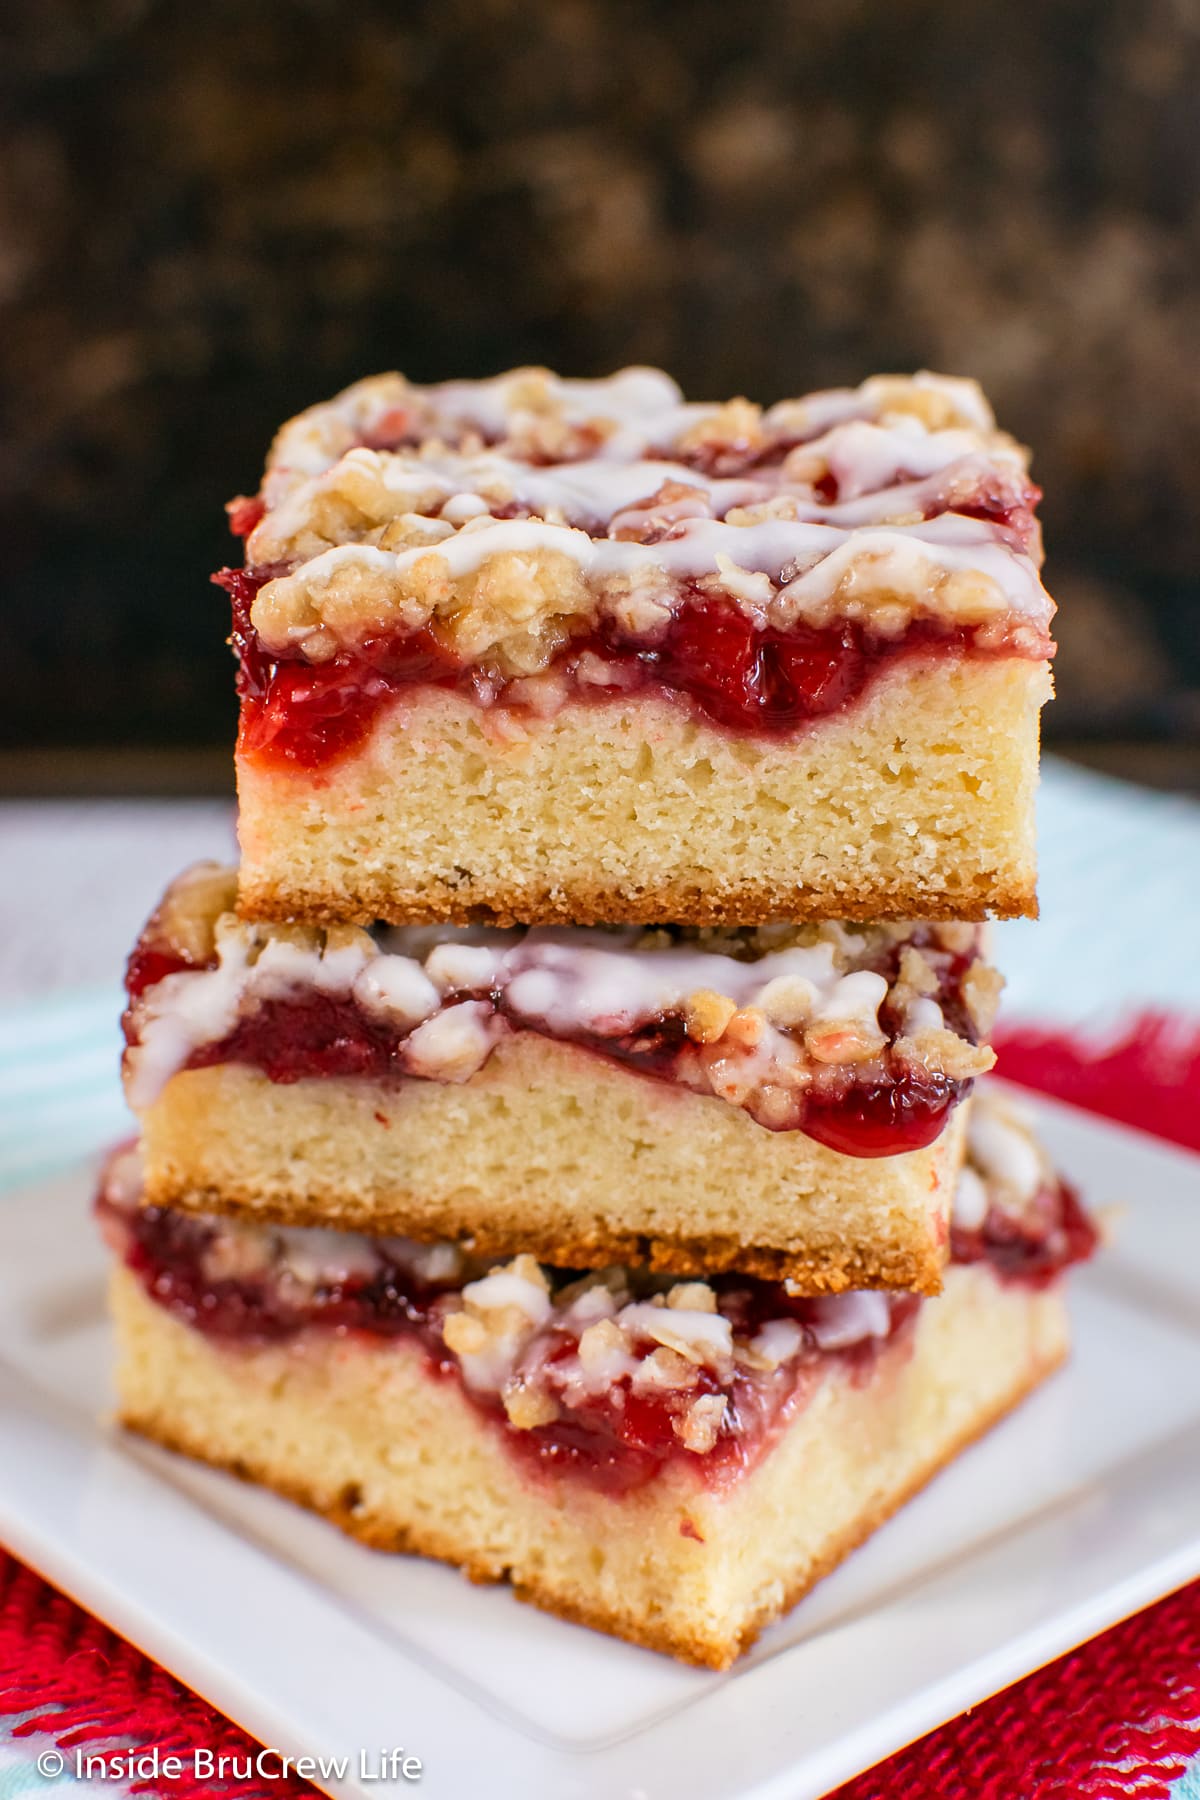 A stack of three squares of coffee cake made with cherries on a white plate.